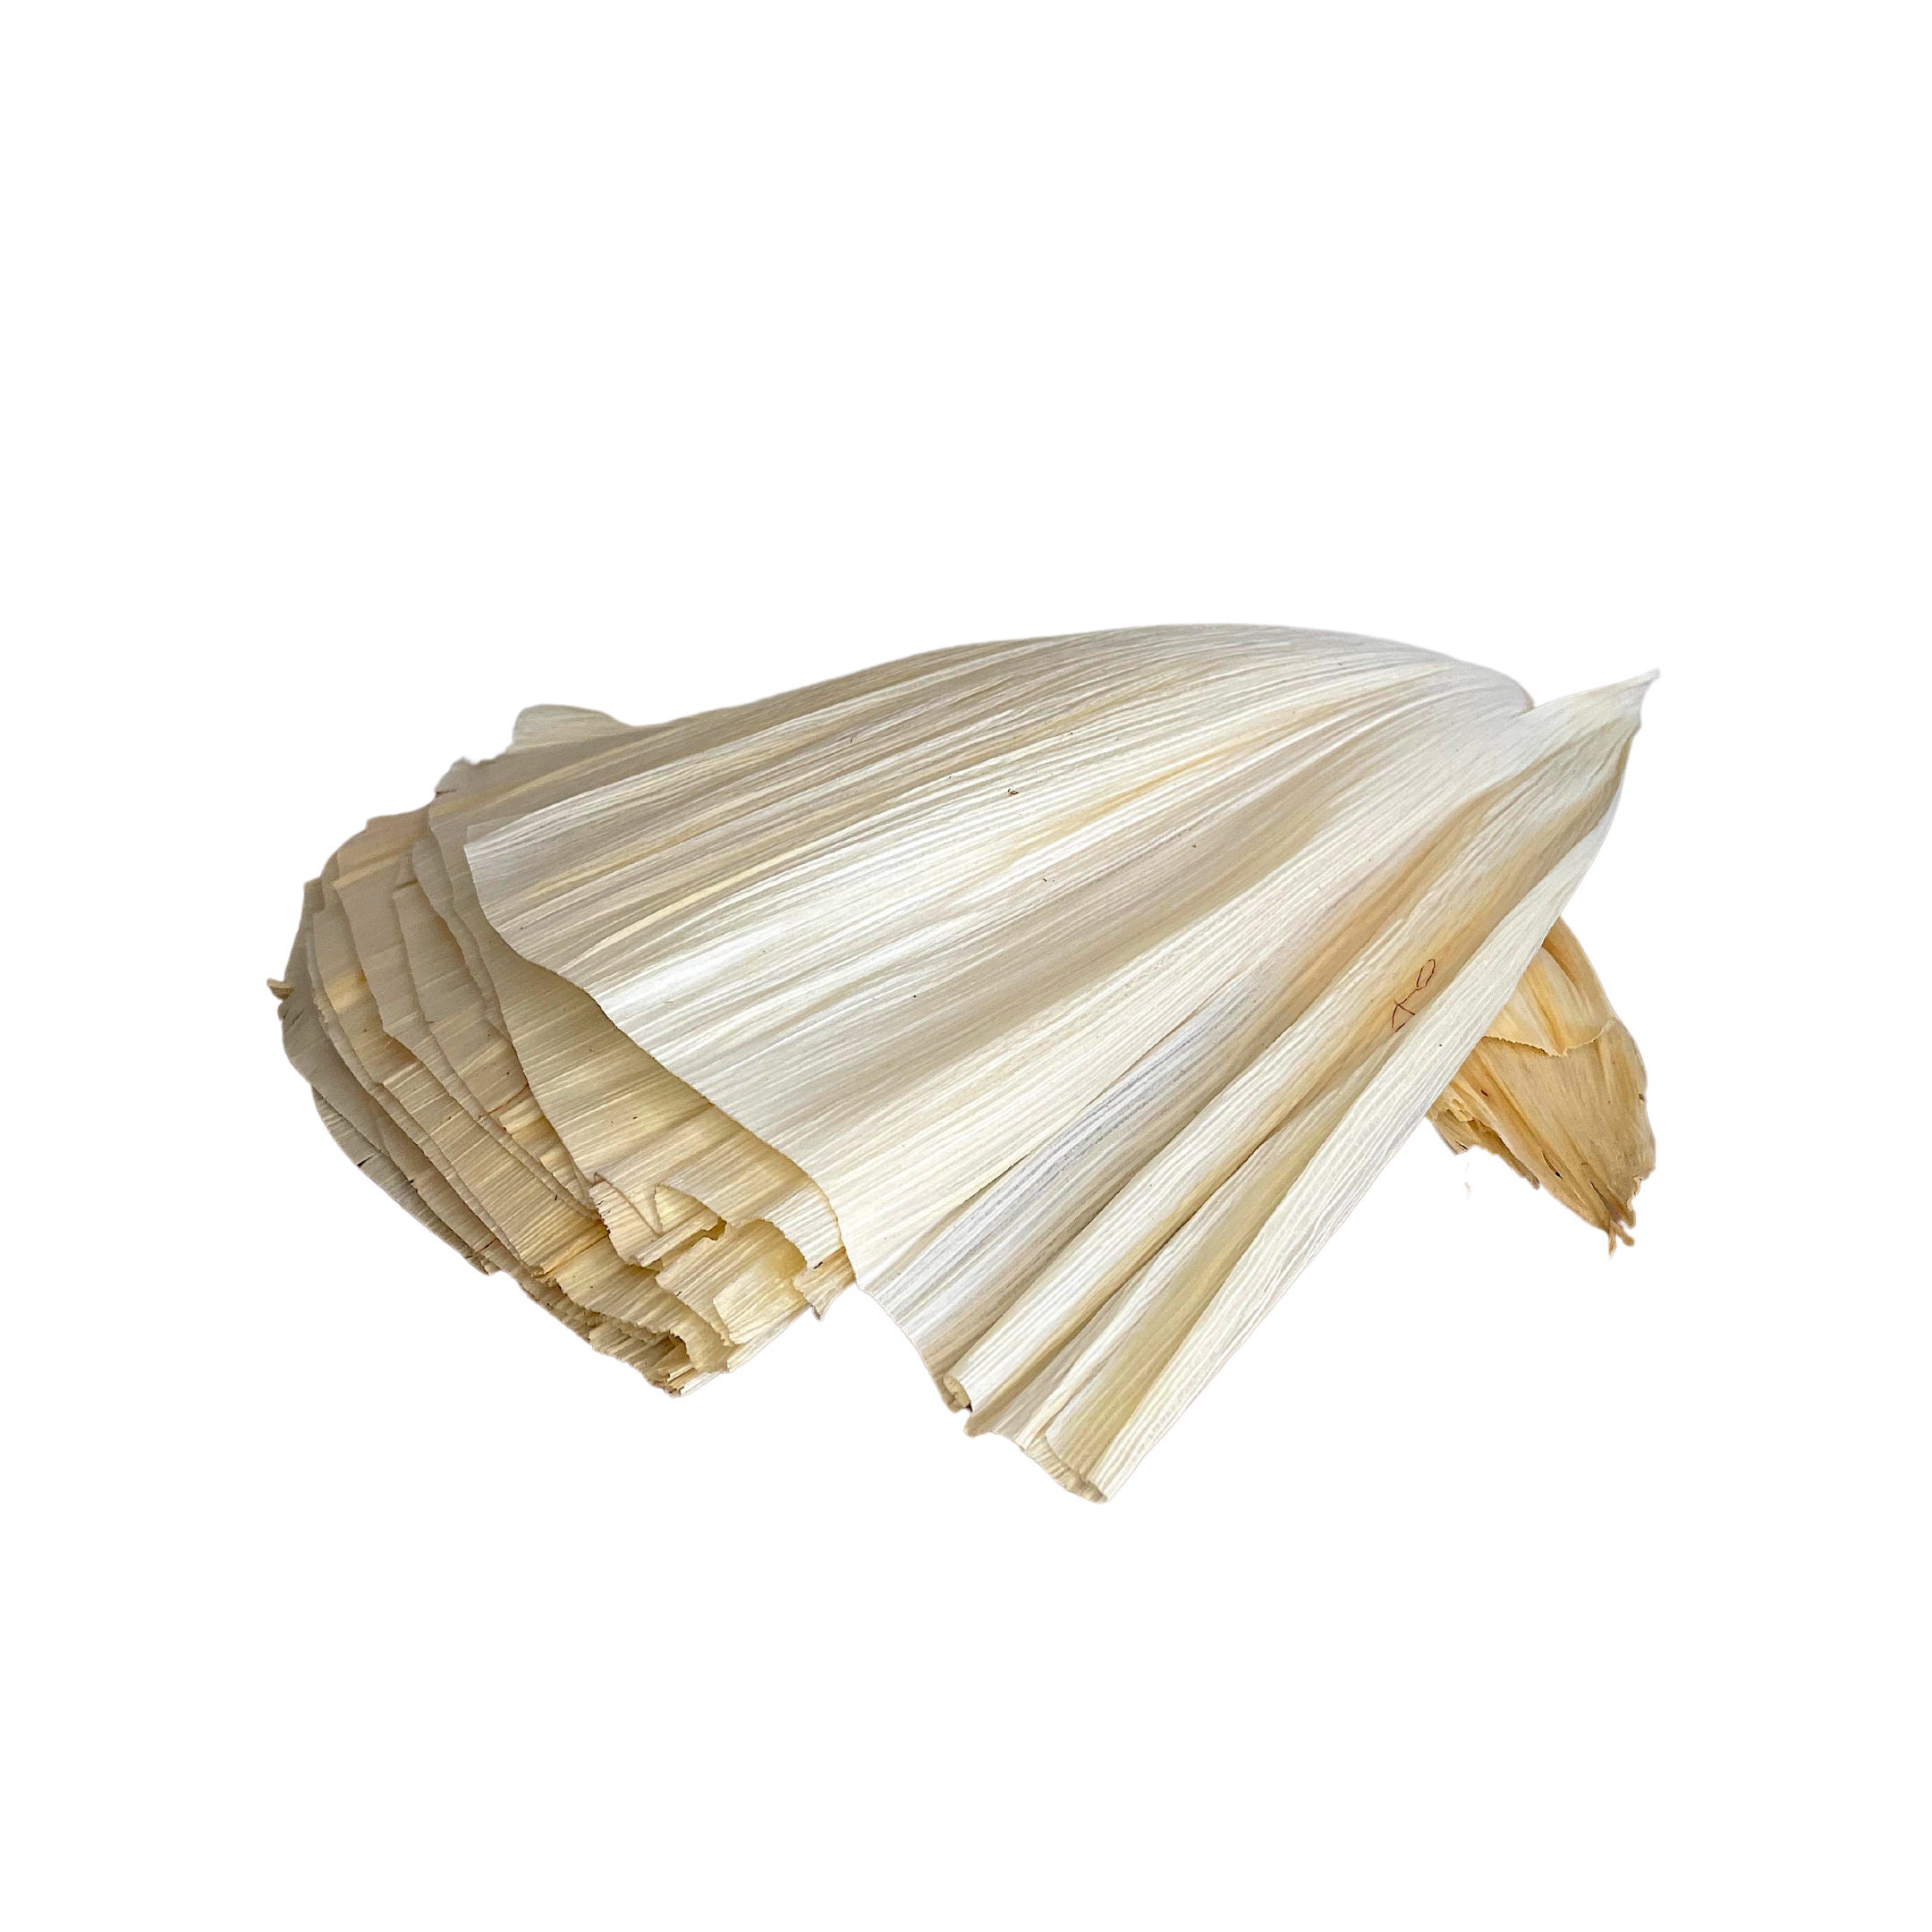 Corn Husks For Tamales 1 LB (16oz)– Natural and Premium Dried Corn Husk  Tamale Wrappers – Hojas Para Tamal. By Amazing Chiles and Spices.